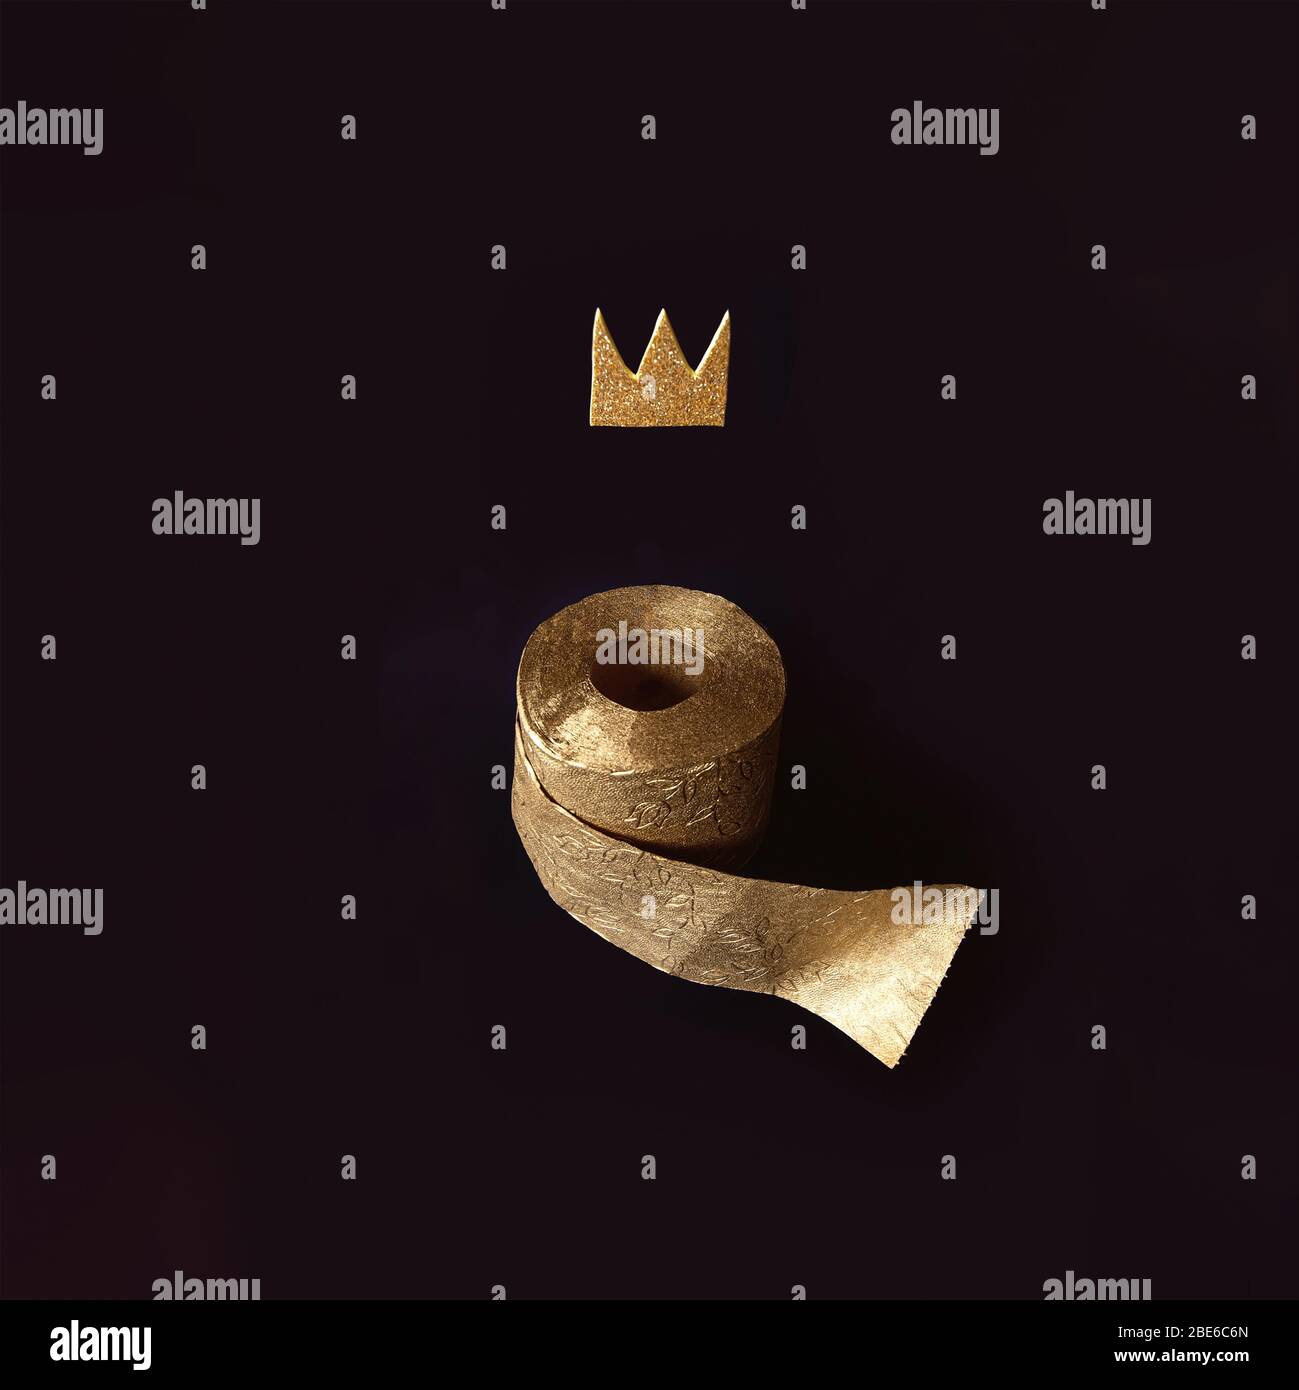 Gold toilet paper with a crown on a black background. A concept on the topic of coronavirus and pandemic. Stock Photo